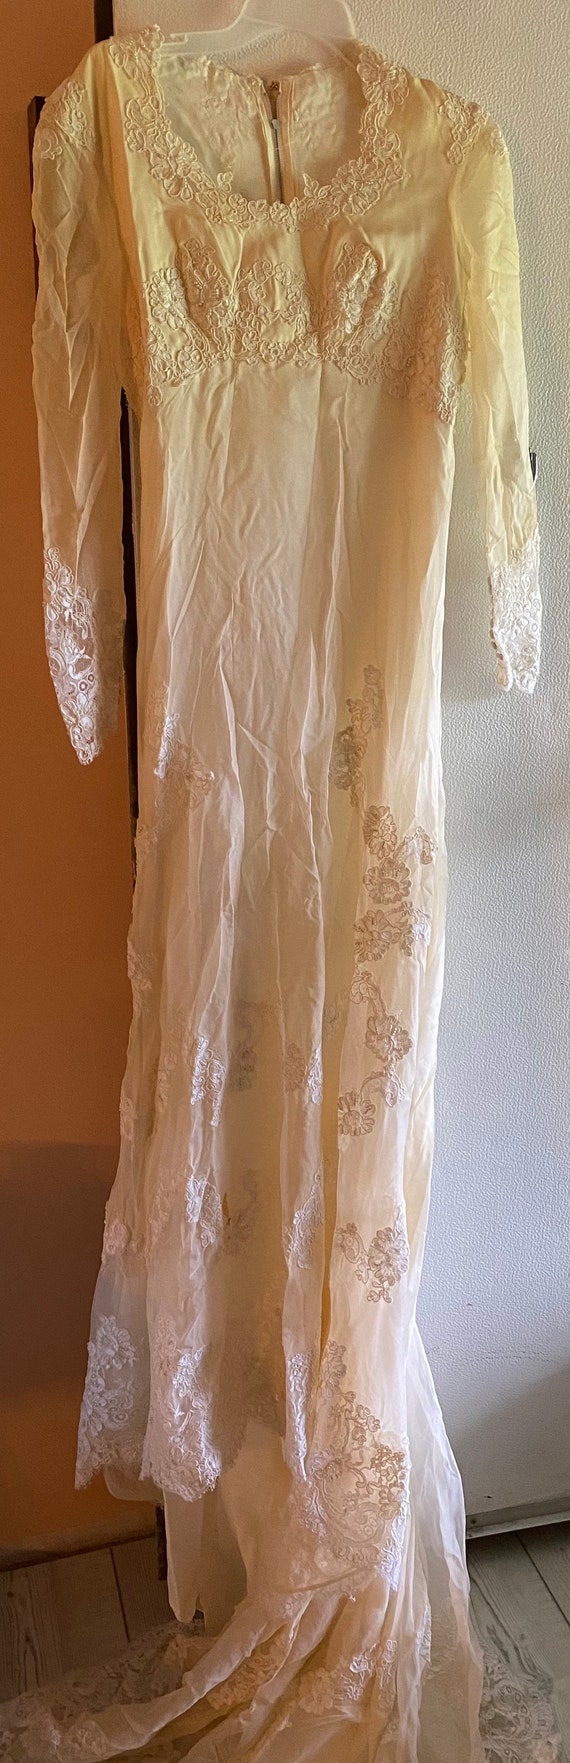 Vintage lace wedding dress with long sleeves